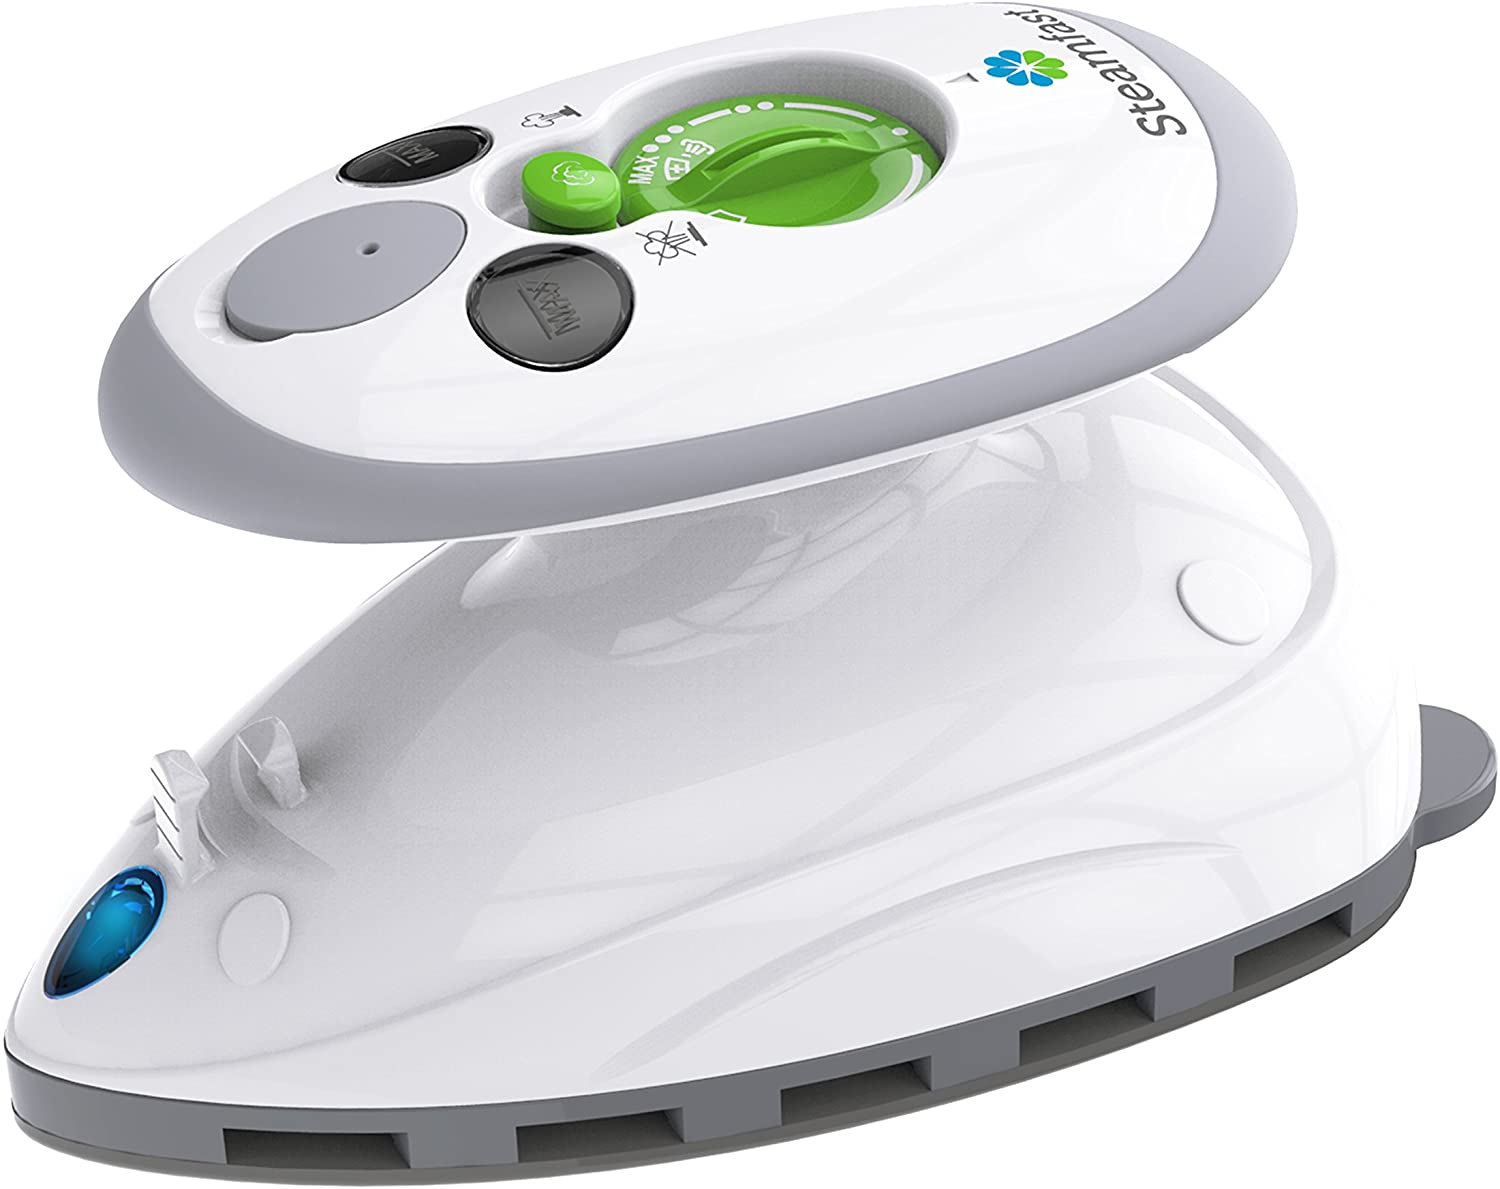 Steamfast SF-717 Mini Steam Iron with Dual Voltage, Travel Bag, Non-Stick Soleplate, Anti-Slip Handle, Rapid Heating, 420W Power